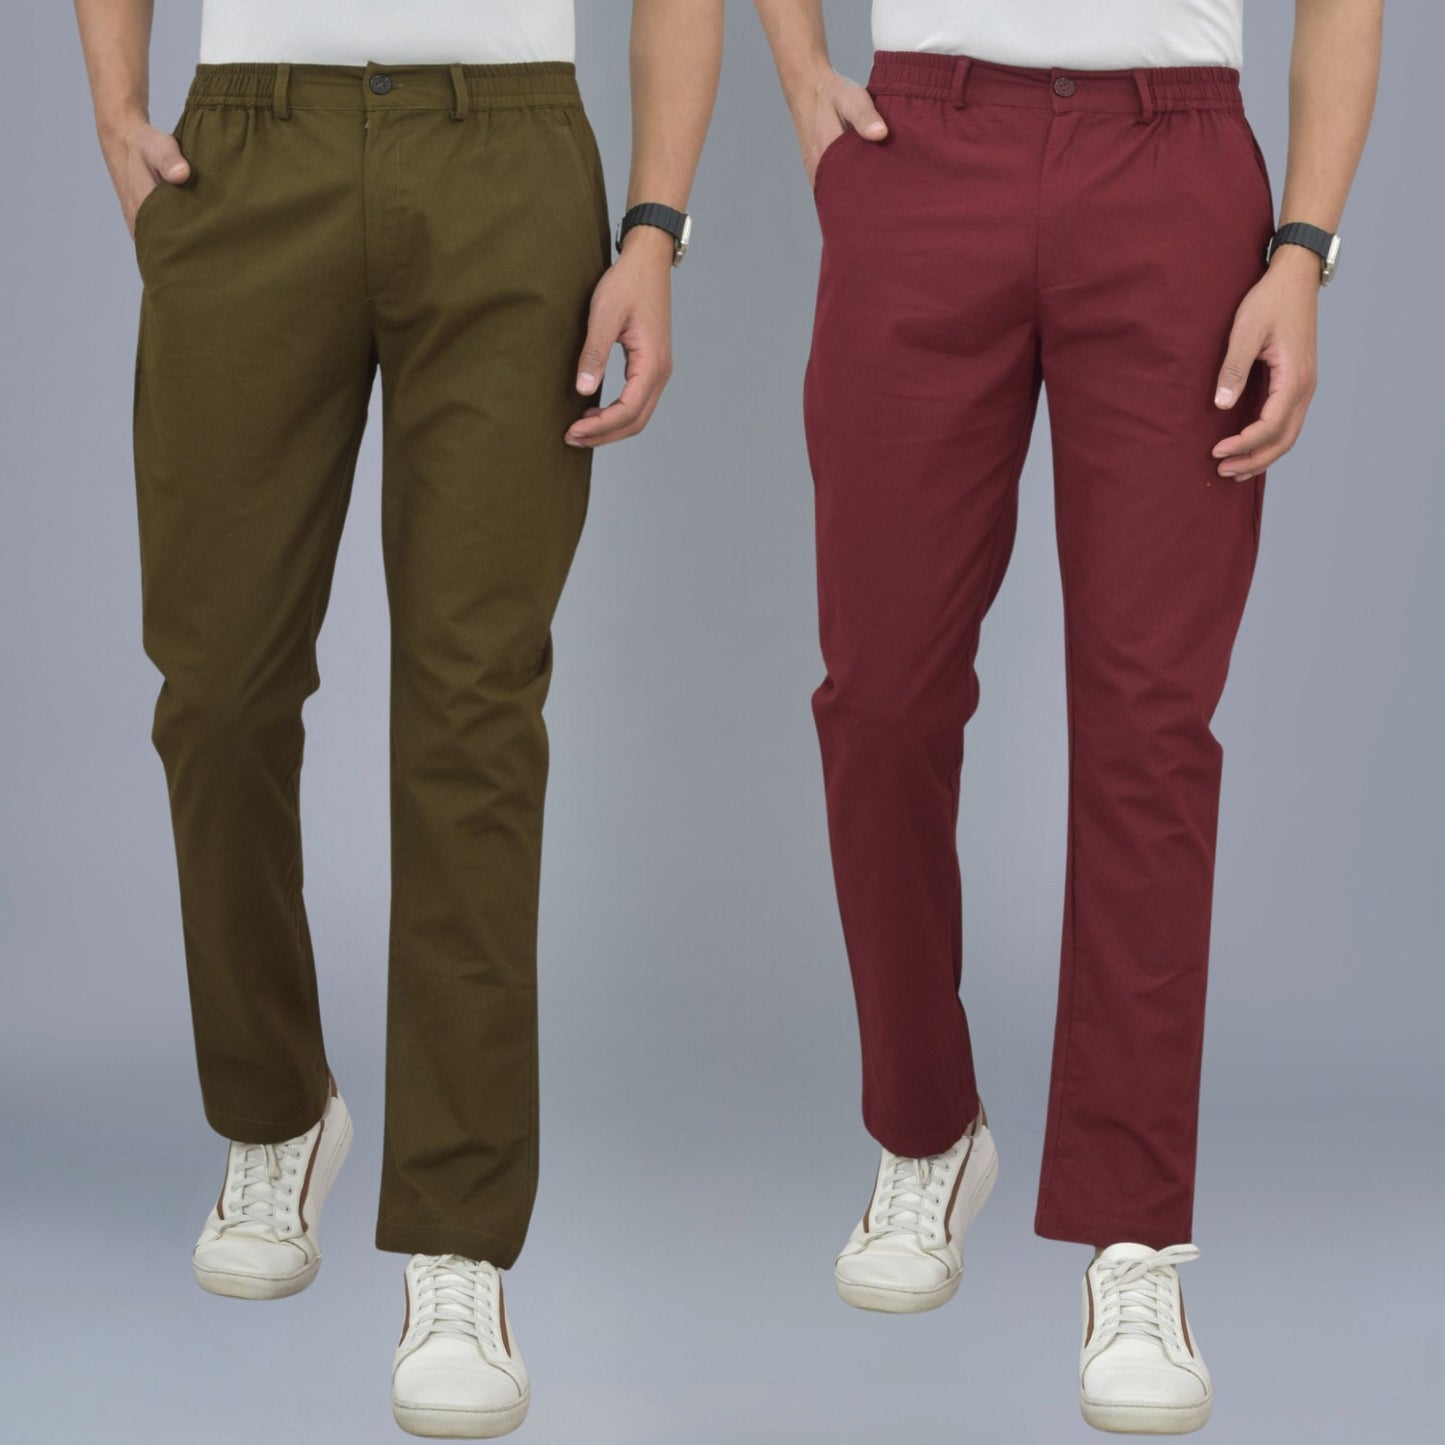 Combo Pack Of Mens Mehendi Green And Wine Regualr Fit Cotton Trouser